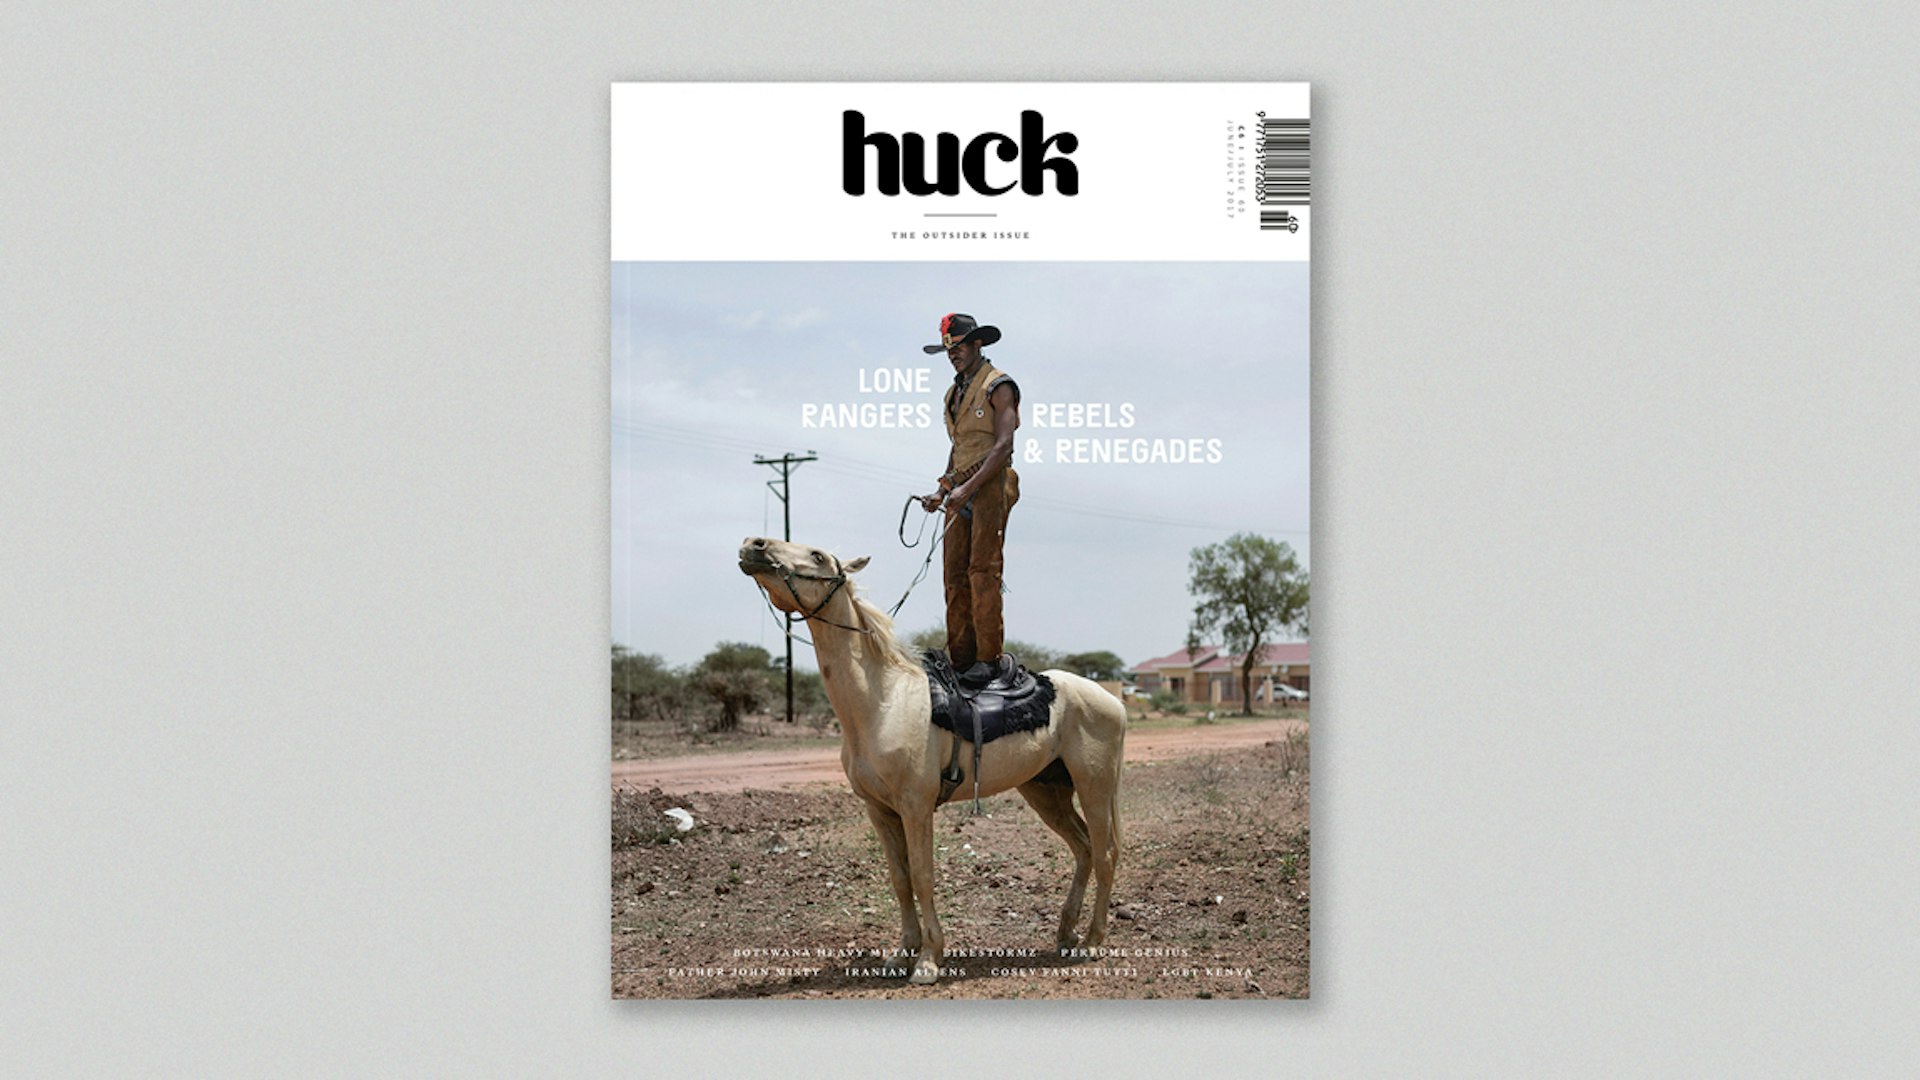 Huck 60 – The Outsider Issue